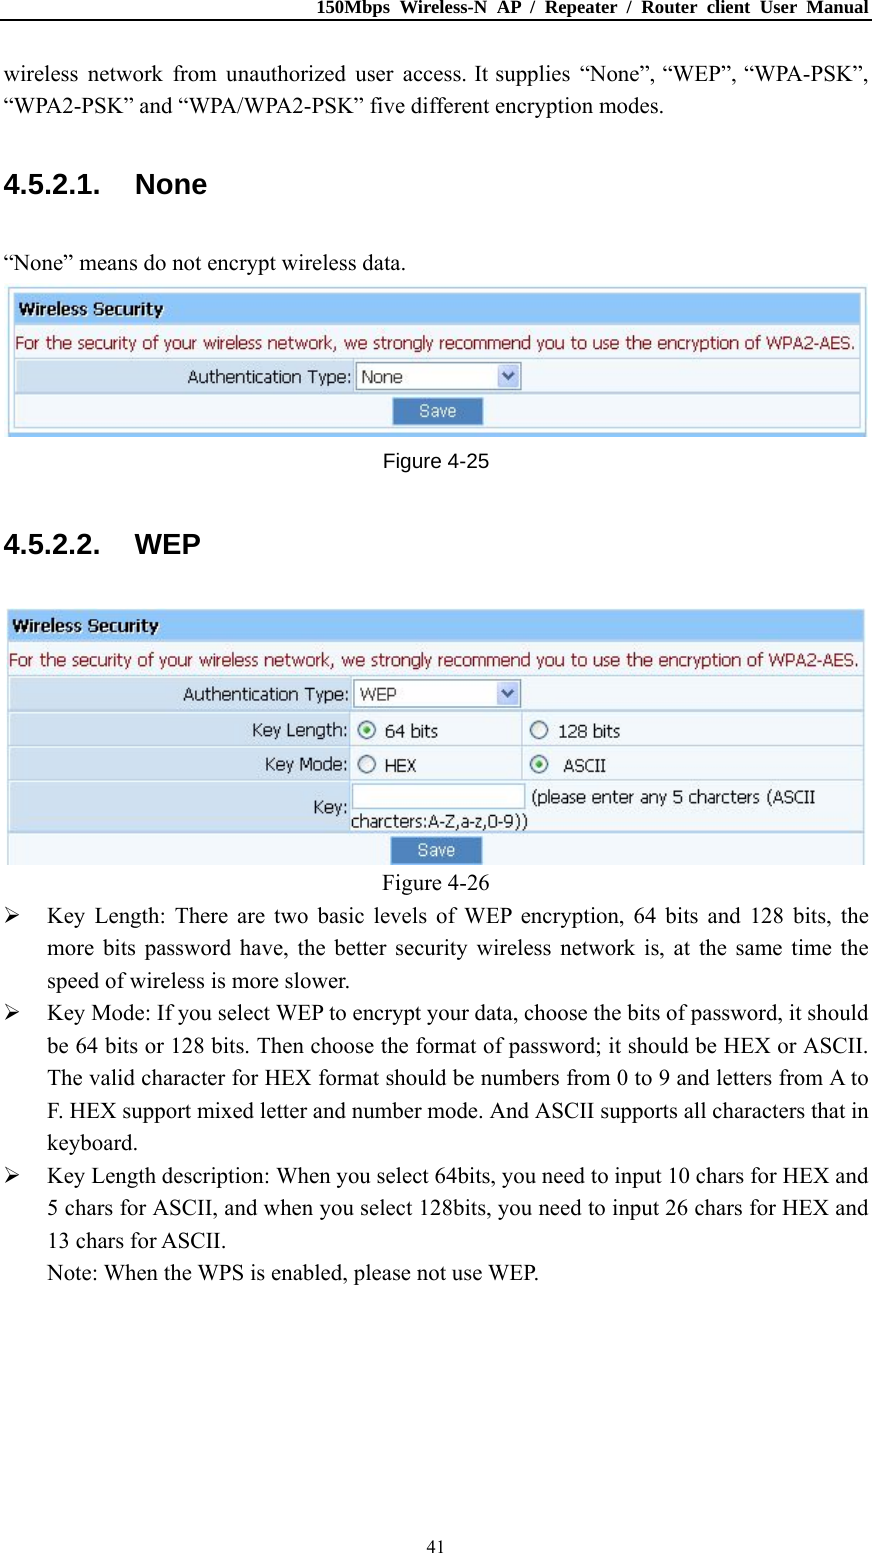 150Mbps Wireless-N AP / Repeater / Router client User Manual  41wireless network from unauthorized user access. It supplies “None”, “WEP”, “WPA-PSK”, “WPA2-PSK” and “WPA/WPA2-PSK” five different encryption modes. 4.5.2.1. None “None” means do not encrypt wireless data.  Figure 4-25 4.5.2.2. WEP  Figure 4-26  Key Length: There are two basic levels of WEP encryption, 64 bits and 128 bits, the more bits password have, the better security wireless network is, at the same time the speed of wireless is more slower.  Key Mode: If you select WEP to encrypt your data, choose the bits of password, it should be 64 bits or 128 bits. Then choose the format of password; it should be HEX or ASCII. The valid character for HEX format should be numbers from 0 to 9 and letters from A to F. HEX support mixed letter and number mode. And ASCII supports all characters that in keyboard.  Key Length description: When you select 64bits, you need to input 10 chars for HEX and 5 chars for ASCII, and when you select 128bits, you need to input 26 chars for HEX and 13 chars for ASCII. Note: When the WPS is enabled, please not use WEP. 